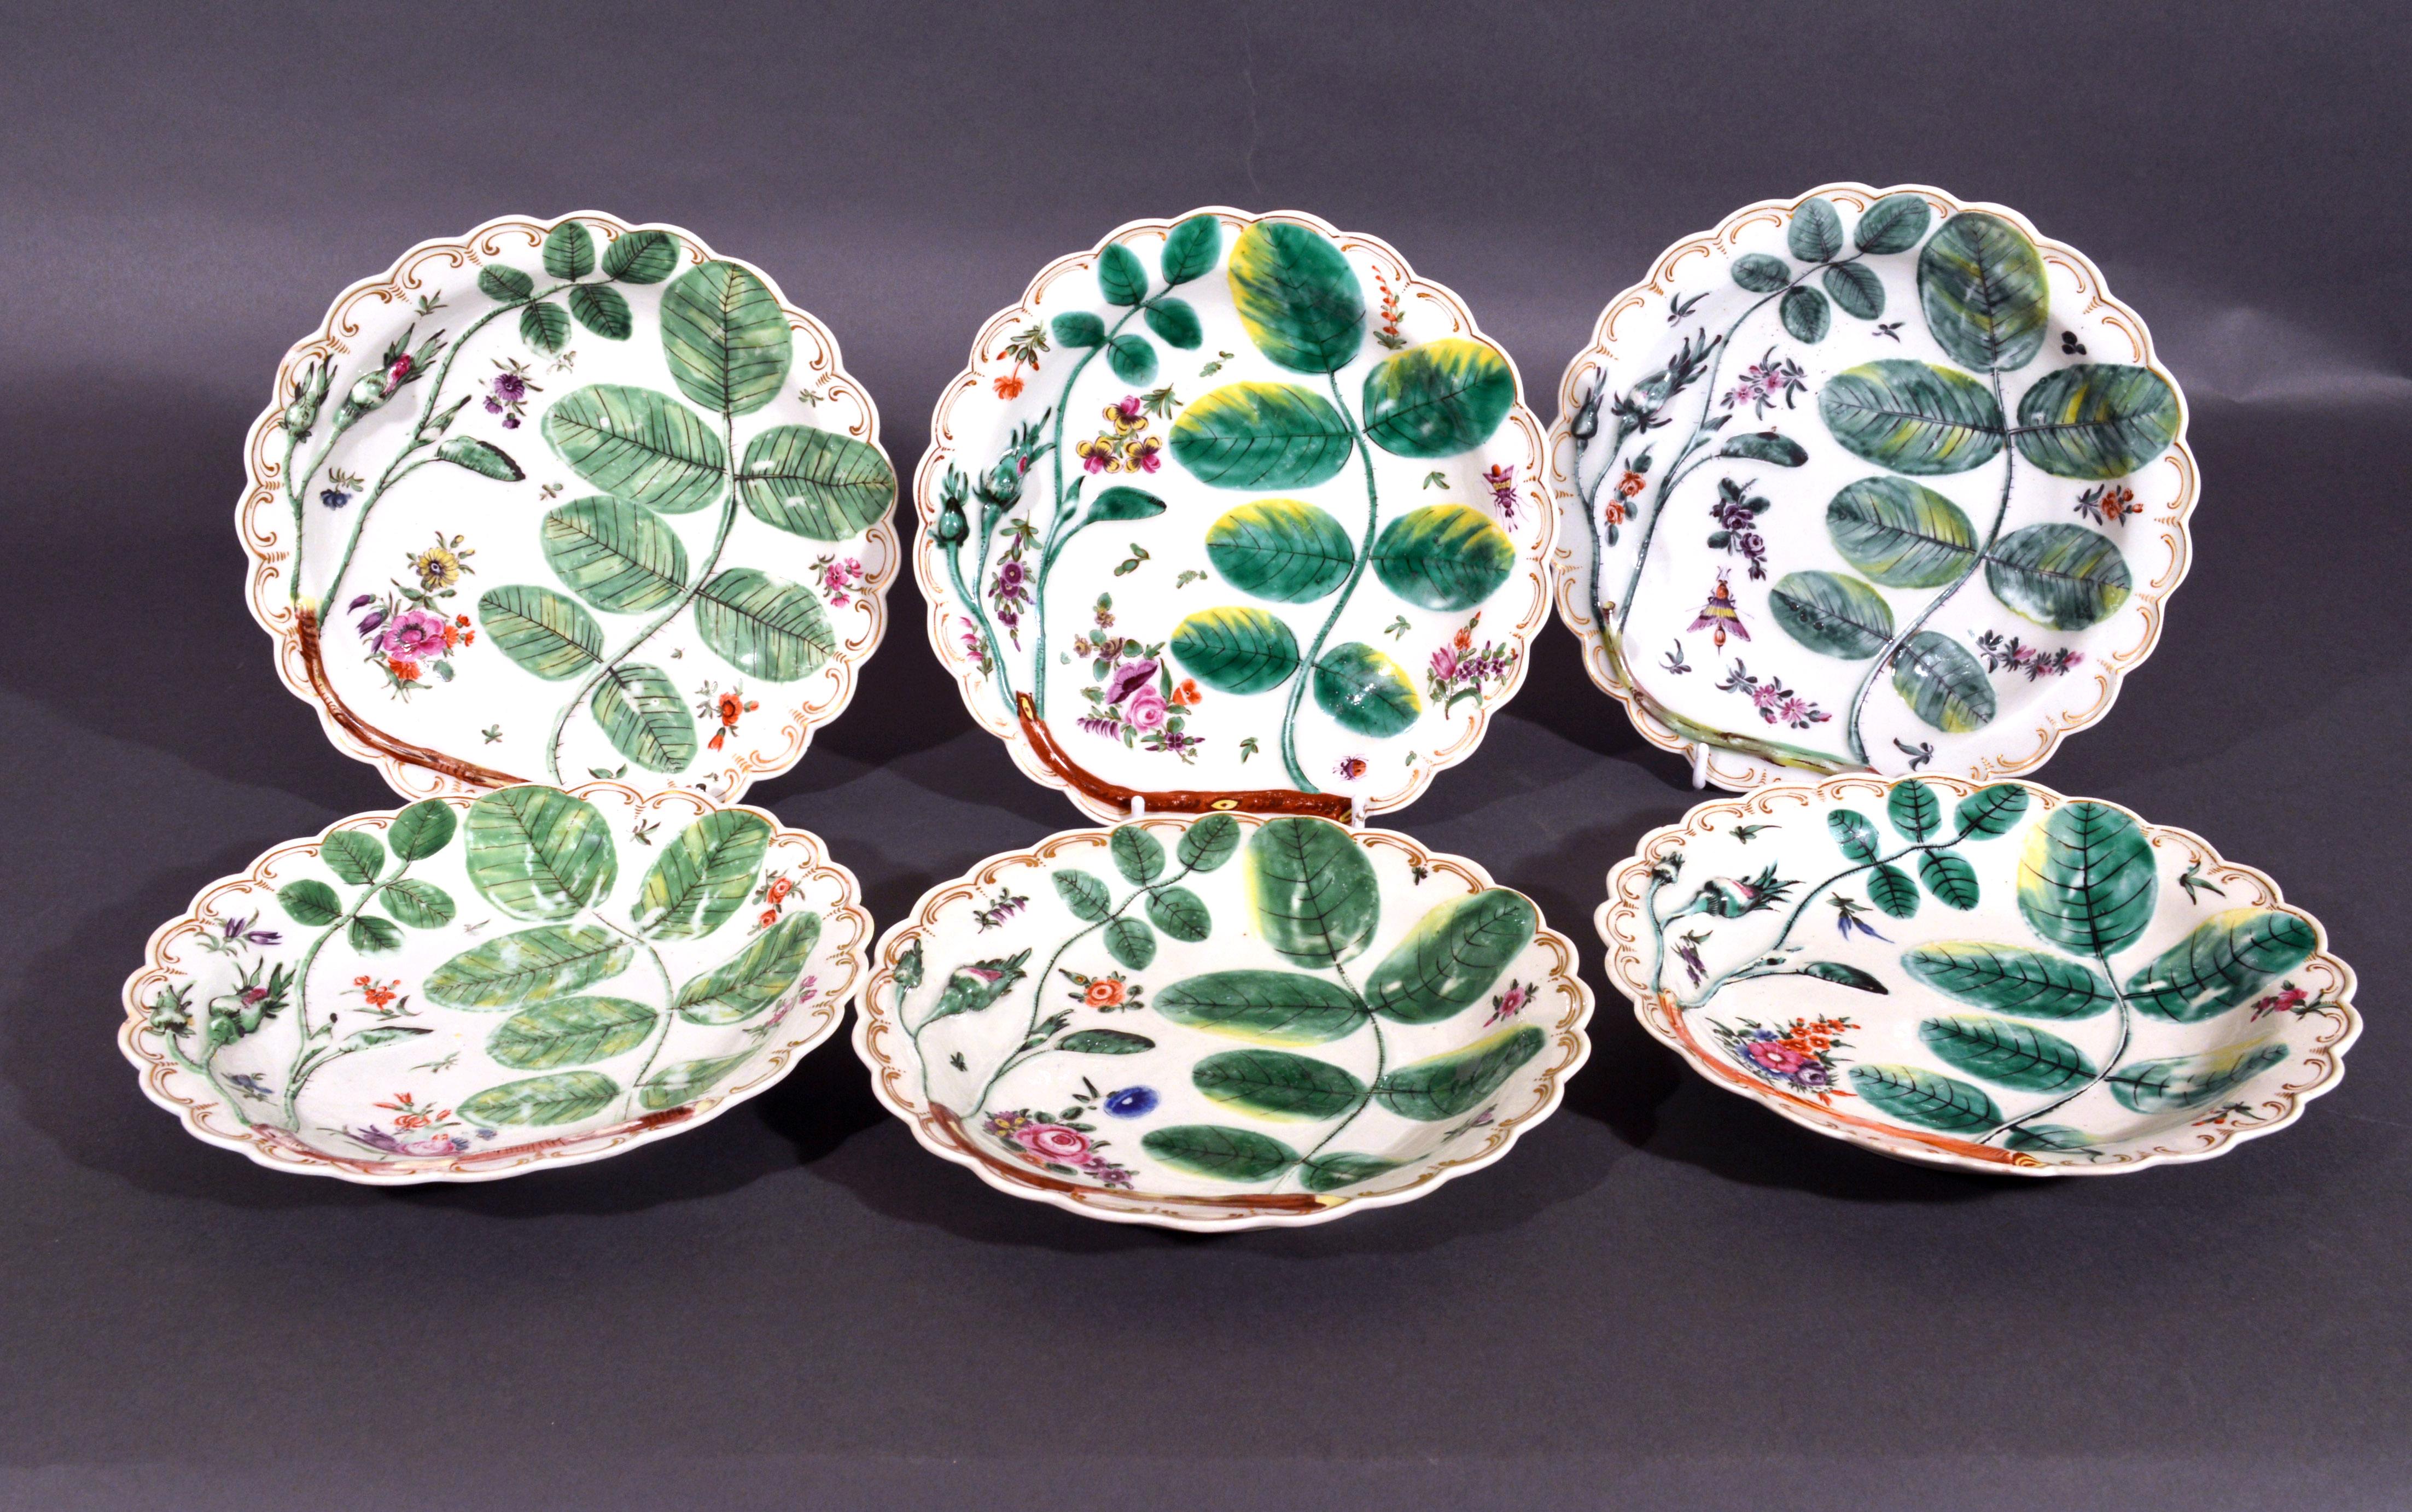 First Period Worcester pair of blind earl porcelain dishes,
circa 1770

The Blind Earl pattern molded dishes with rosebuds and molded leaves picked out in colored enamels and painted with small sprays of flowers and leaves and scattered flowers,